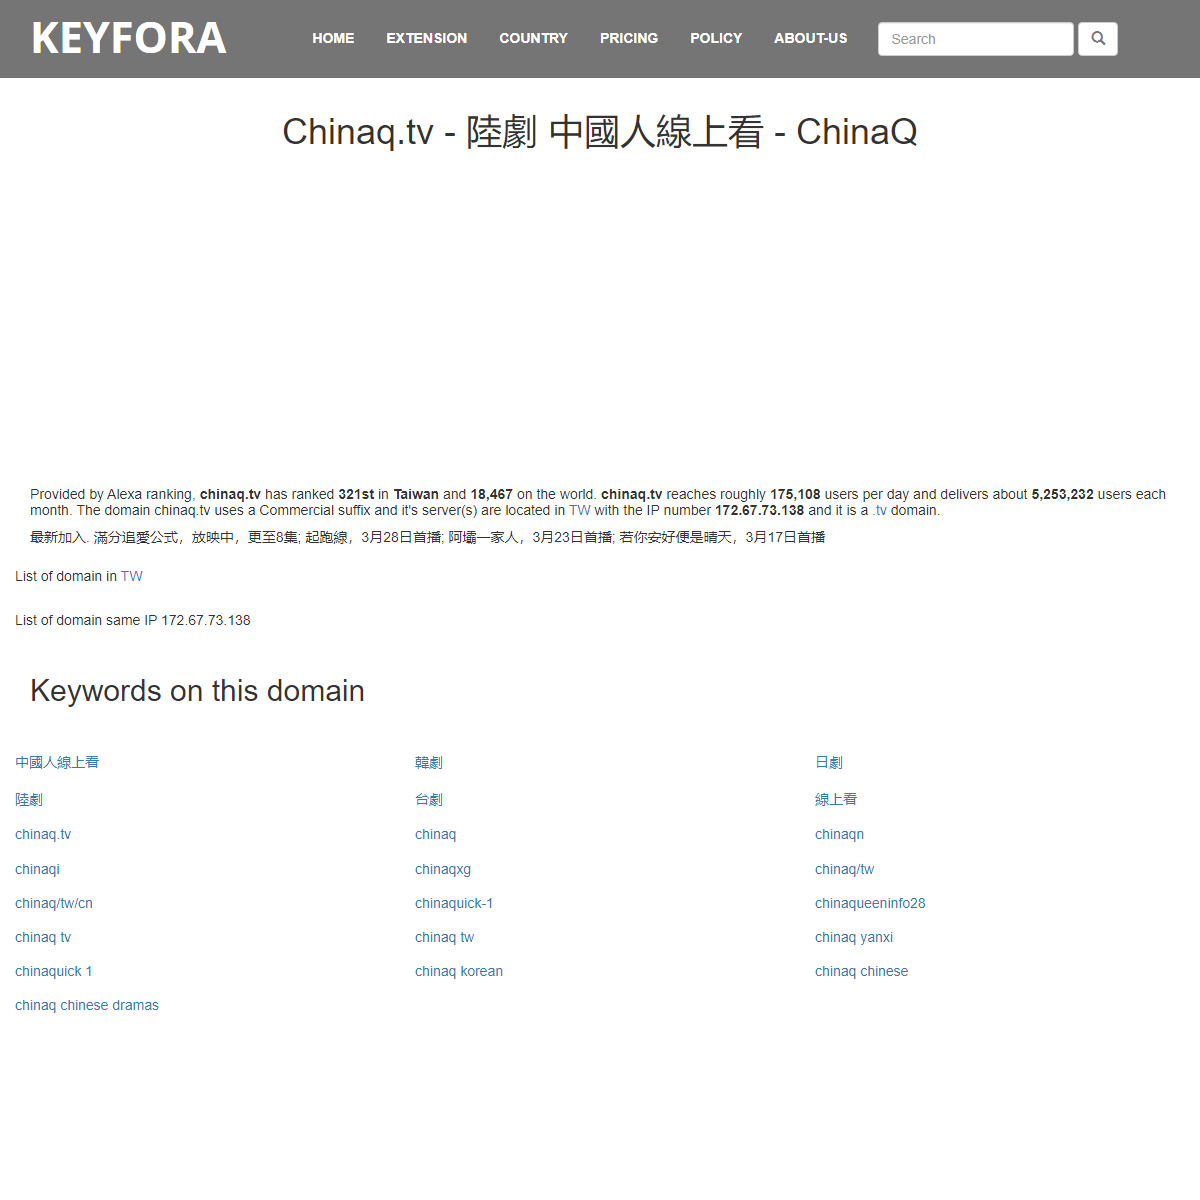 A complete backup of https://www.keyfora.com/site/chinaq.tv